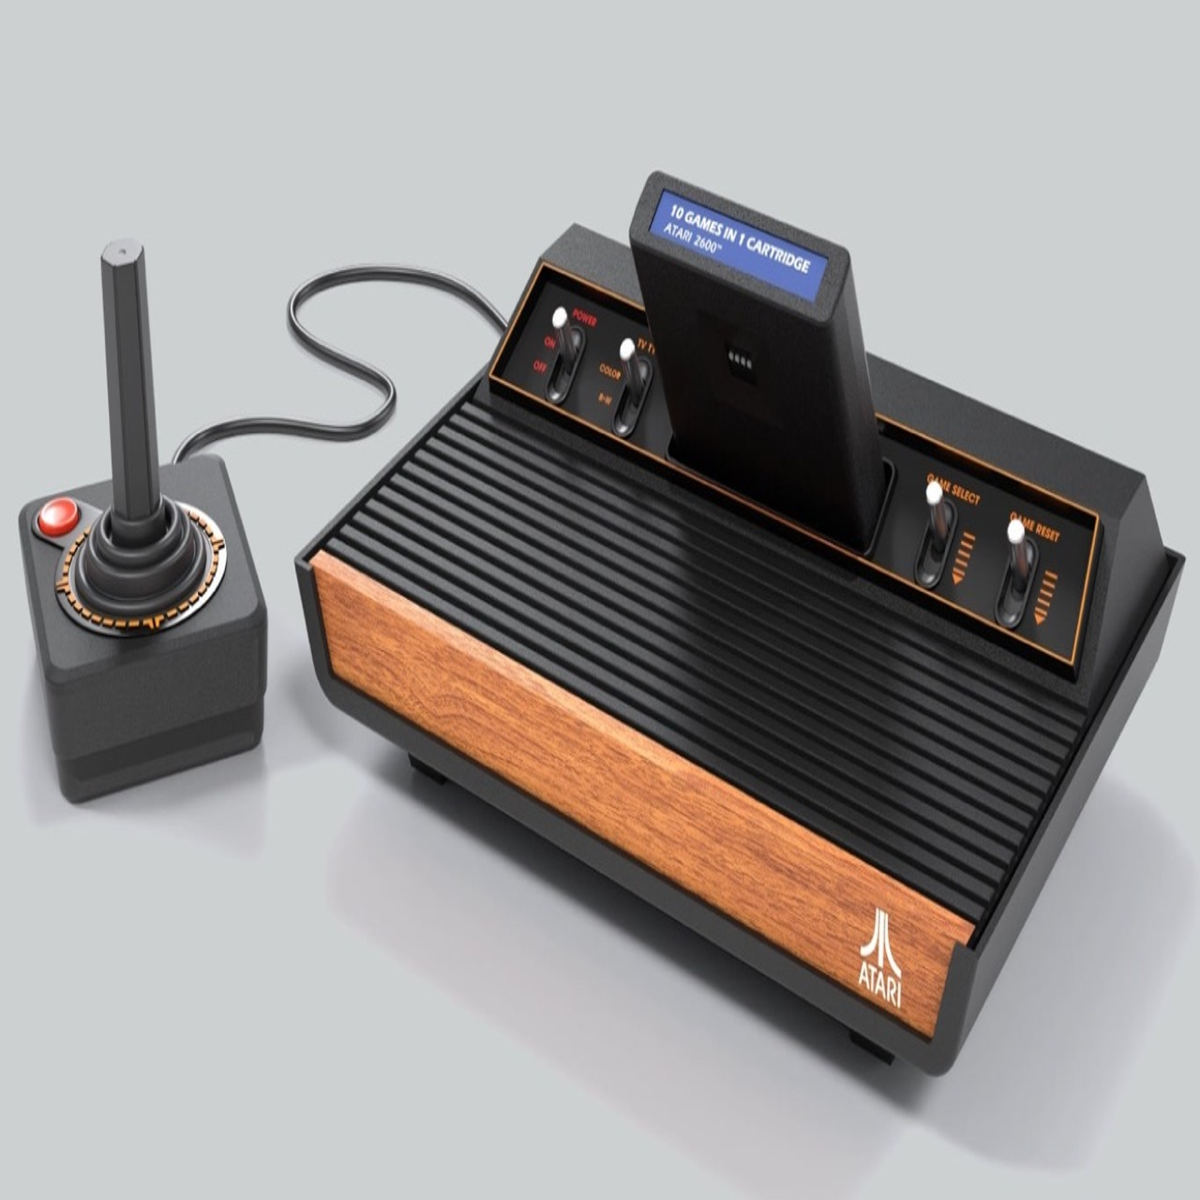 Building the 2600 Plus - a modernised 2600 console - Atari 2600